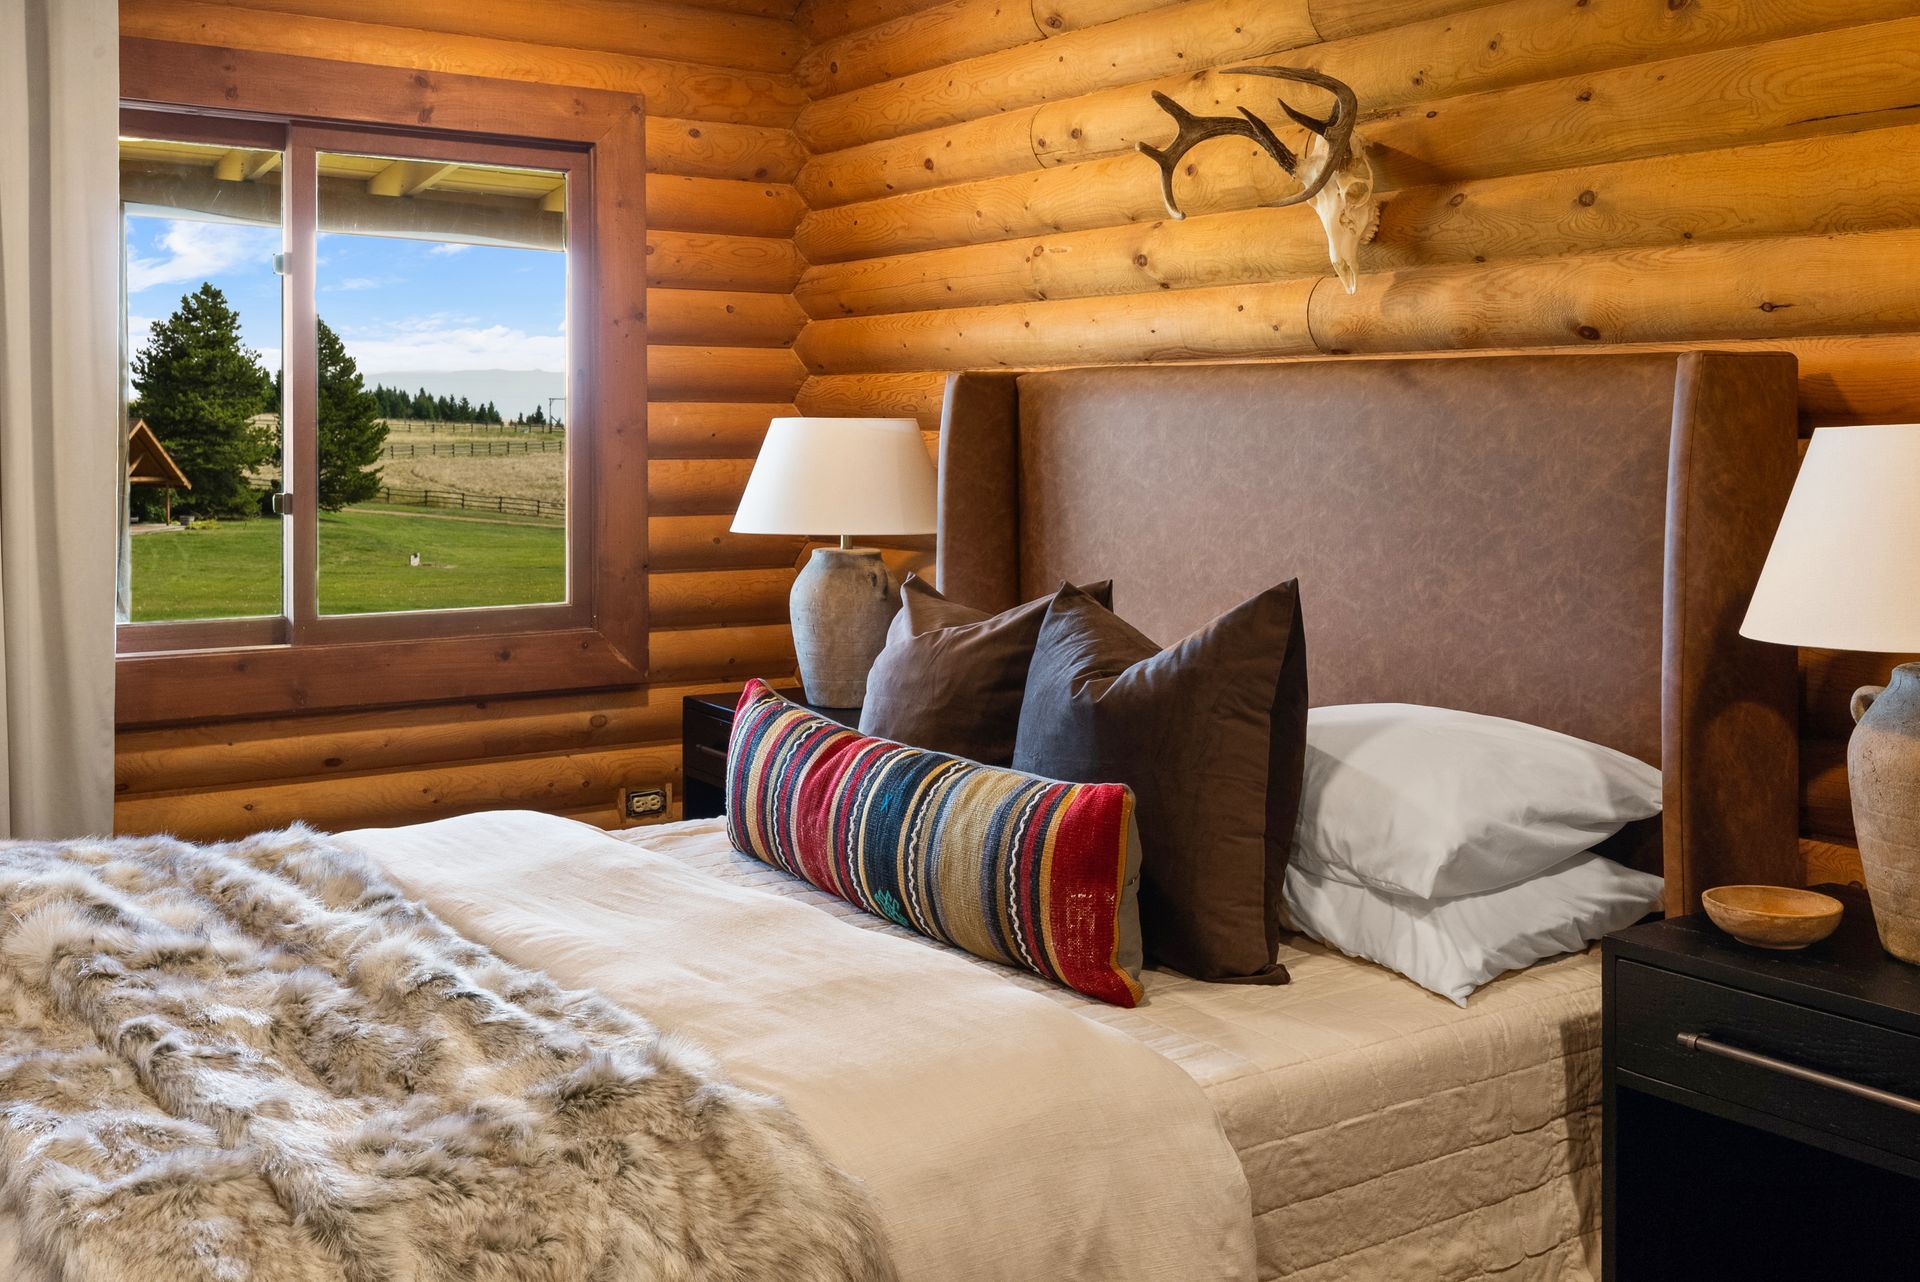 cabin bedroom with log walls and rustic decor